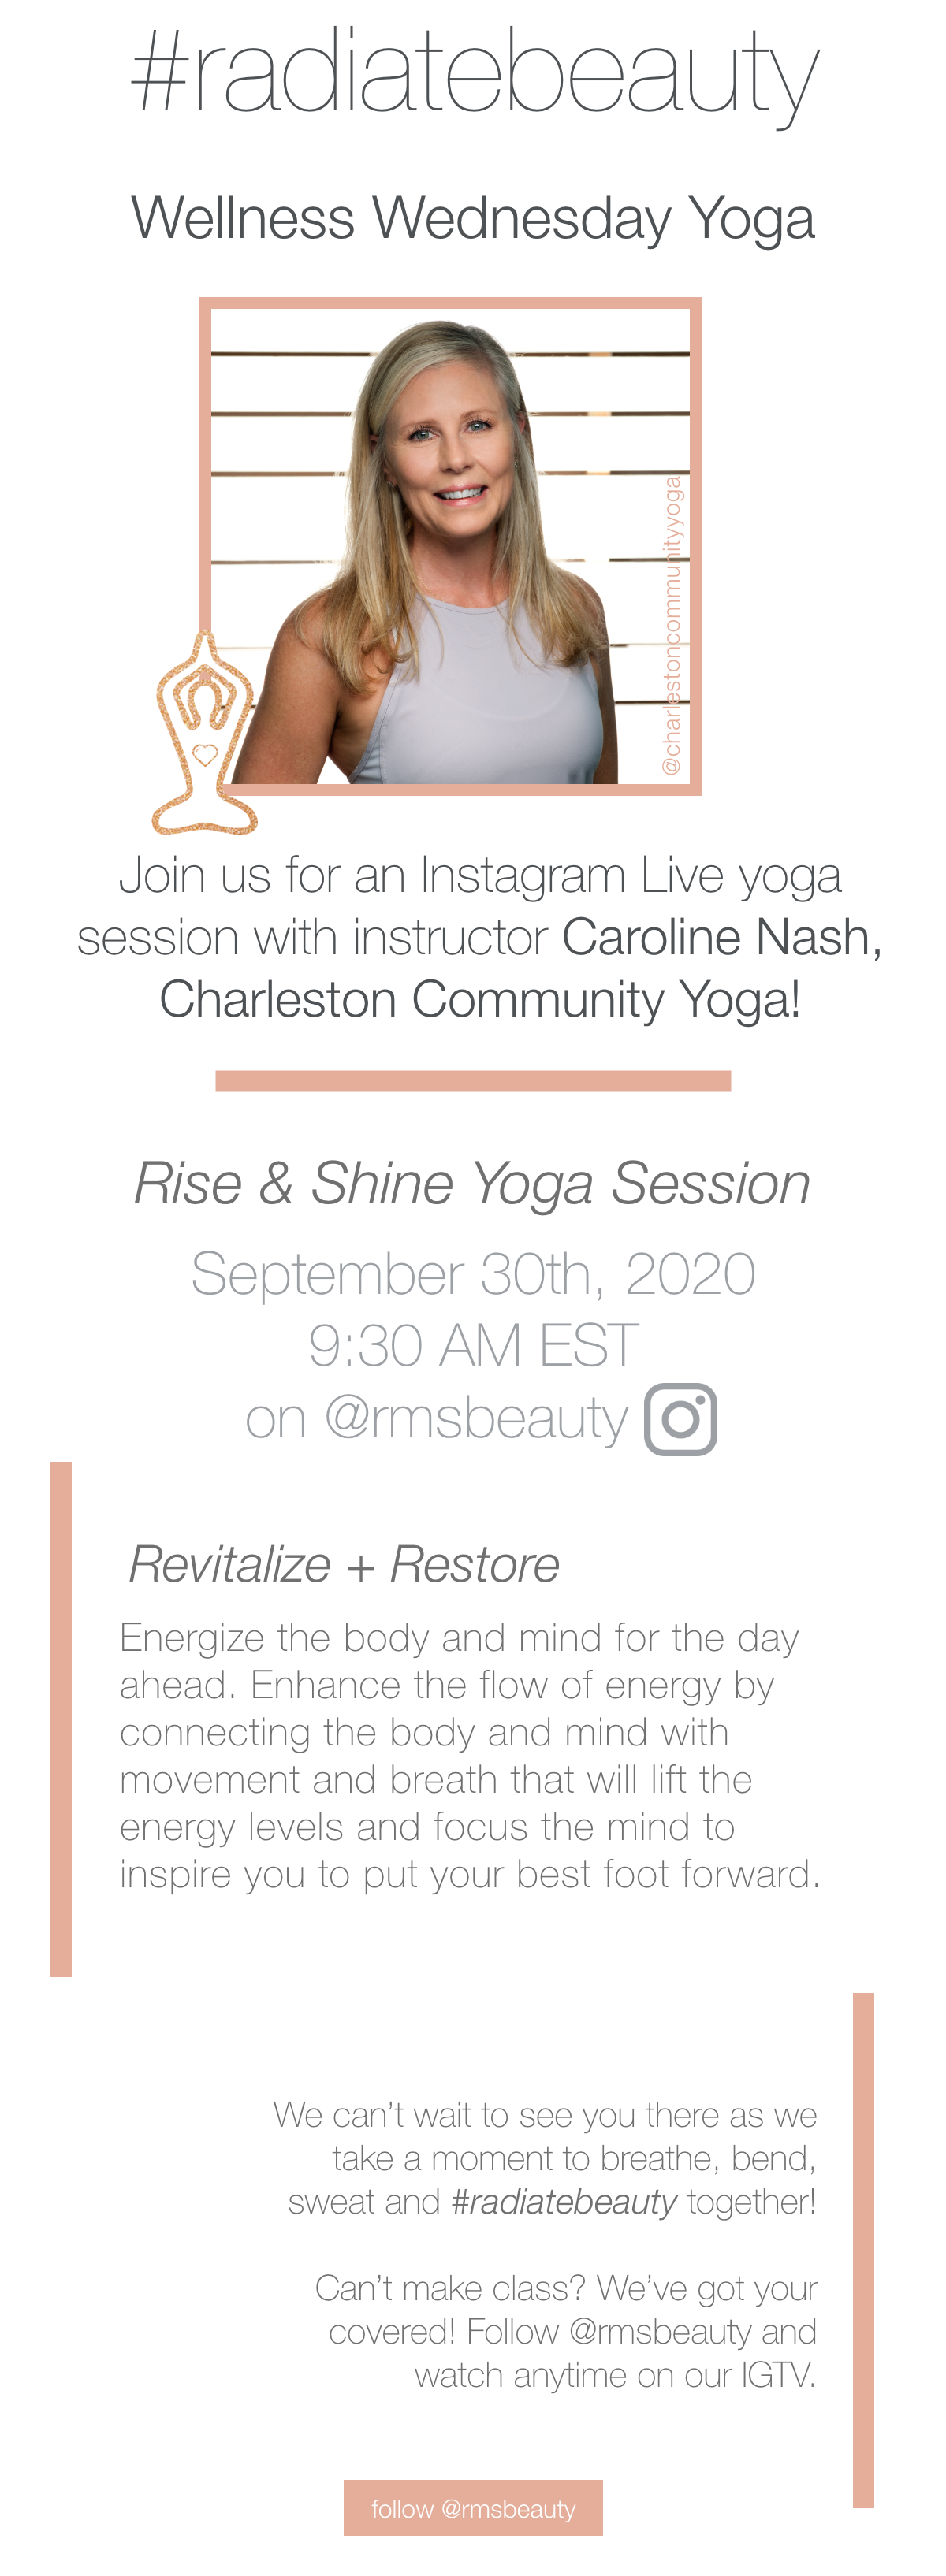 oin us for an Instagram Live yoga session with instructor Caroline Nash,  Charleston Community Yoga! September 30th, 2020 9:30 AM EST on @rmsbeauty 